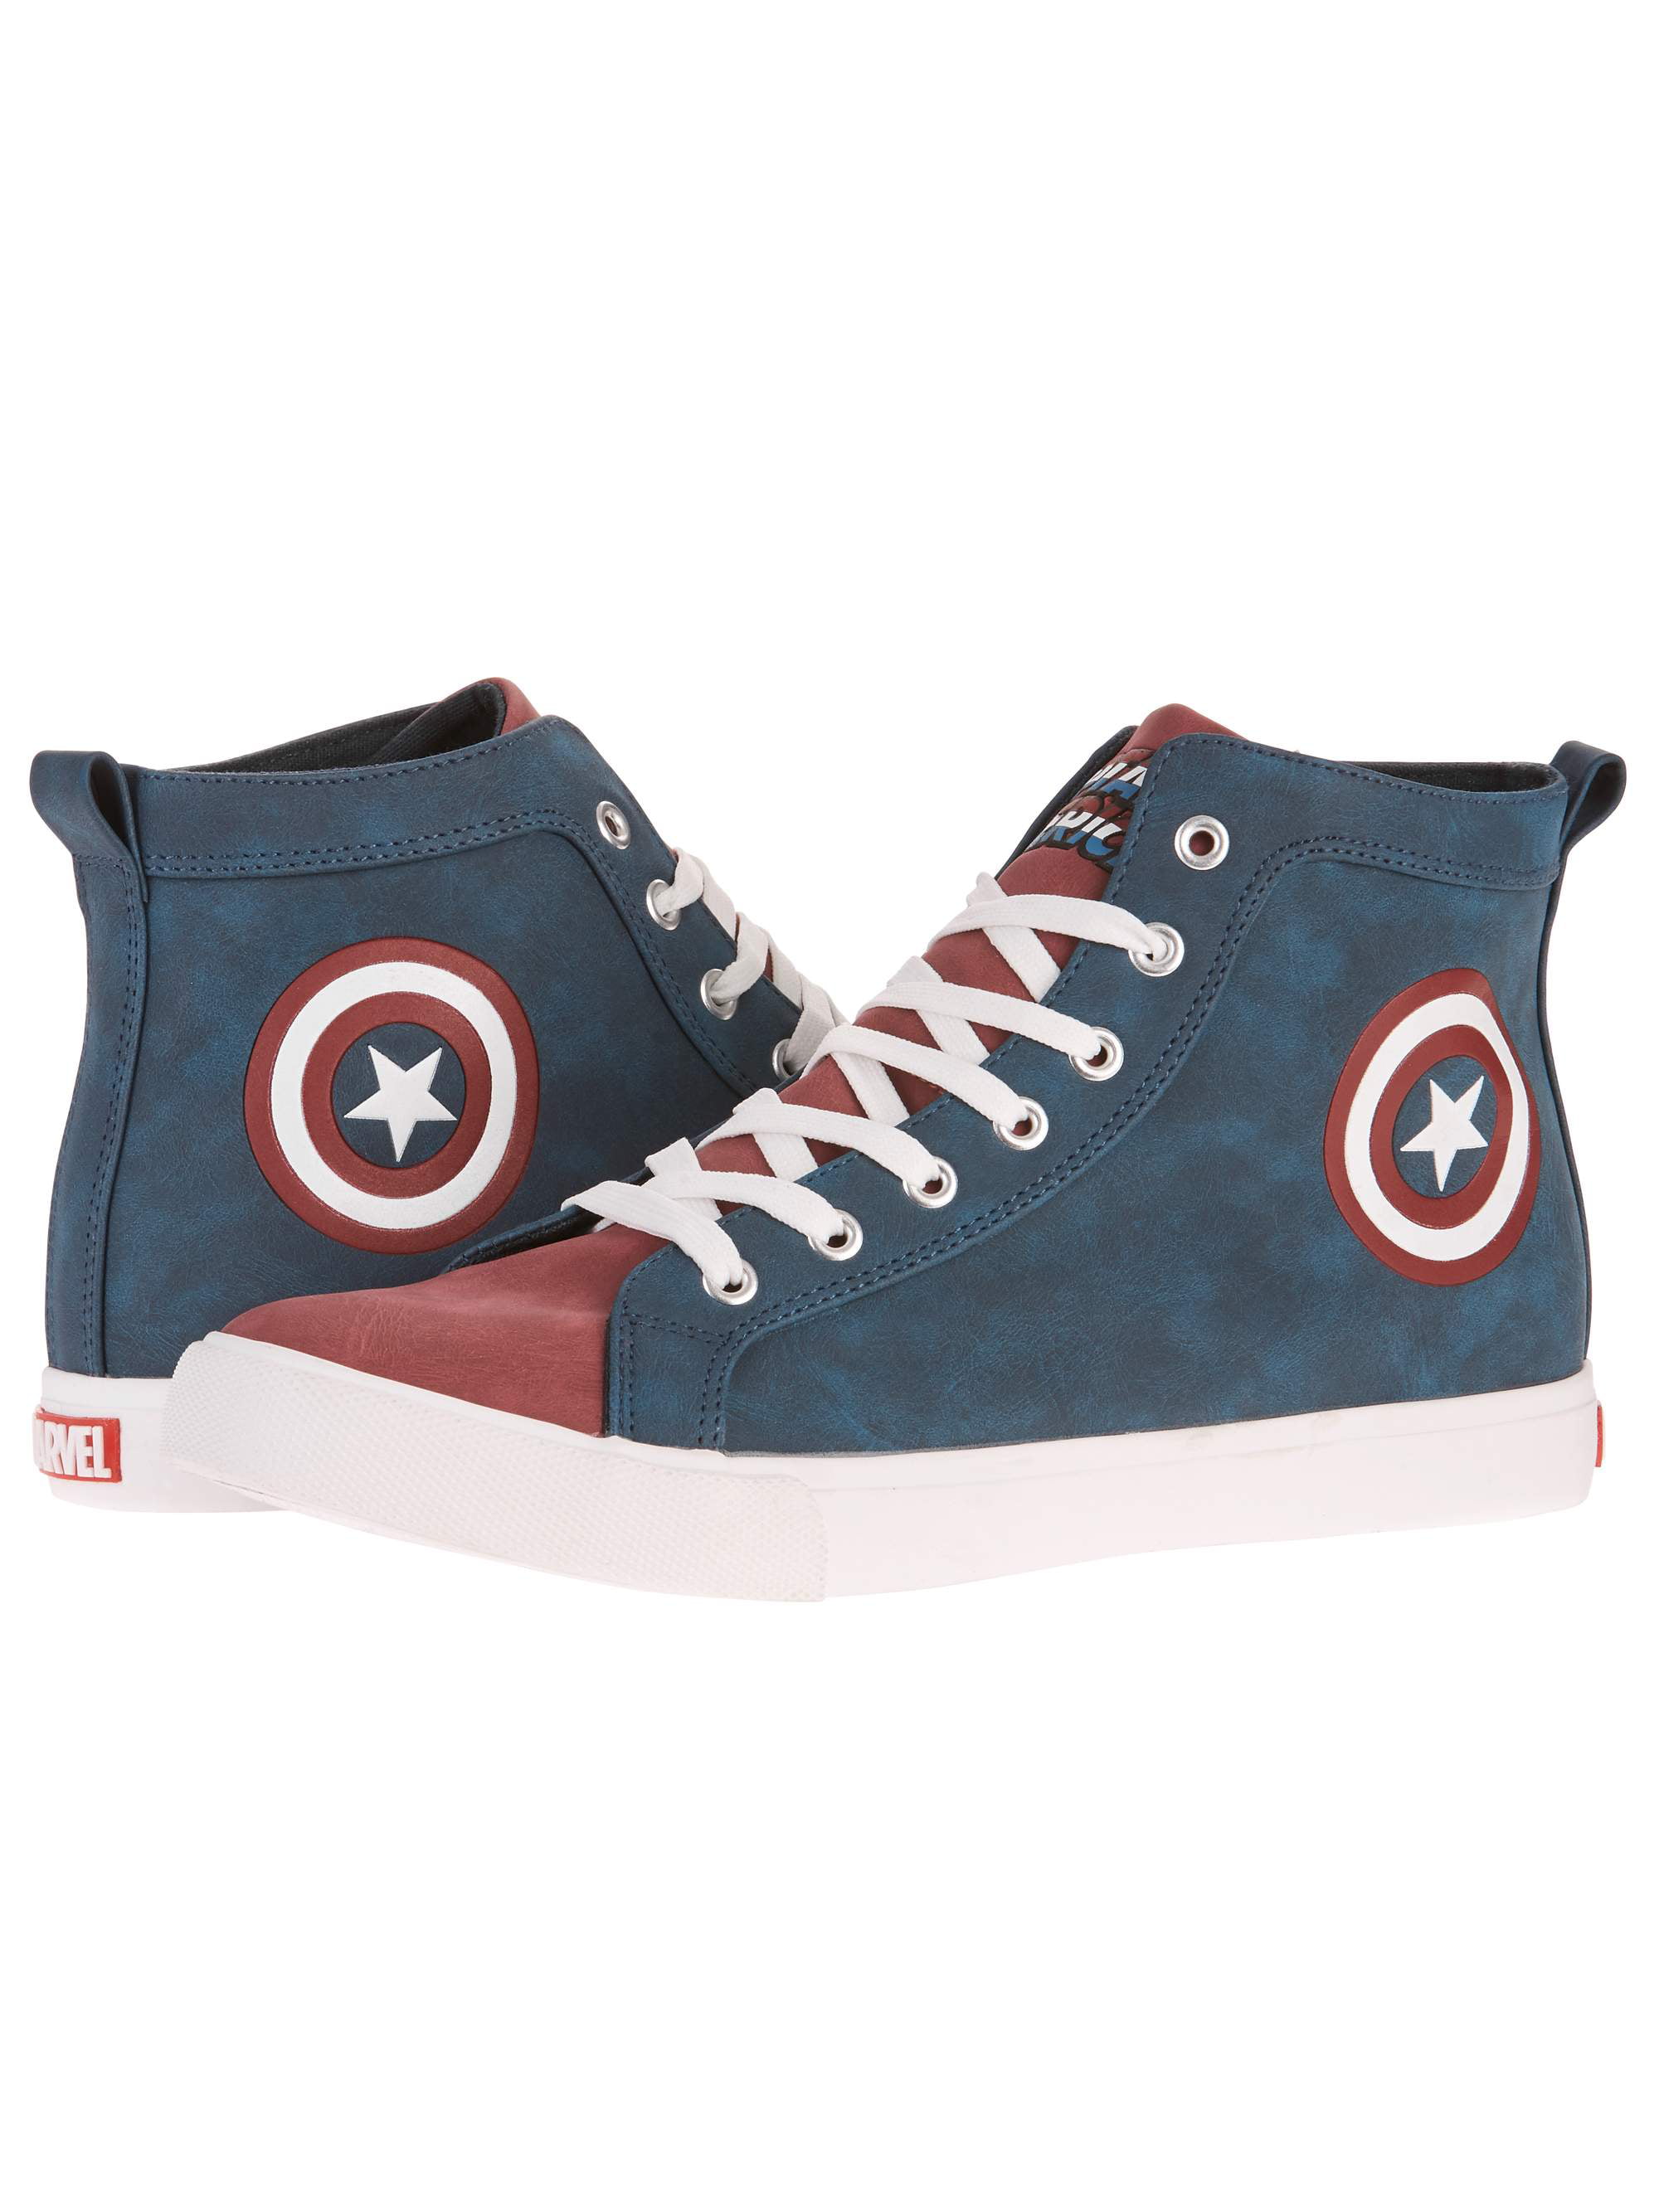 Details about   kid's Marvel Comic Captain America unisex sneakers size 1 navy high top lace up 